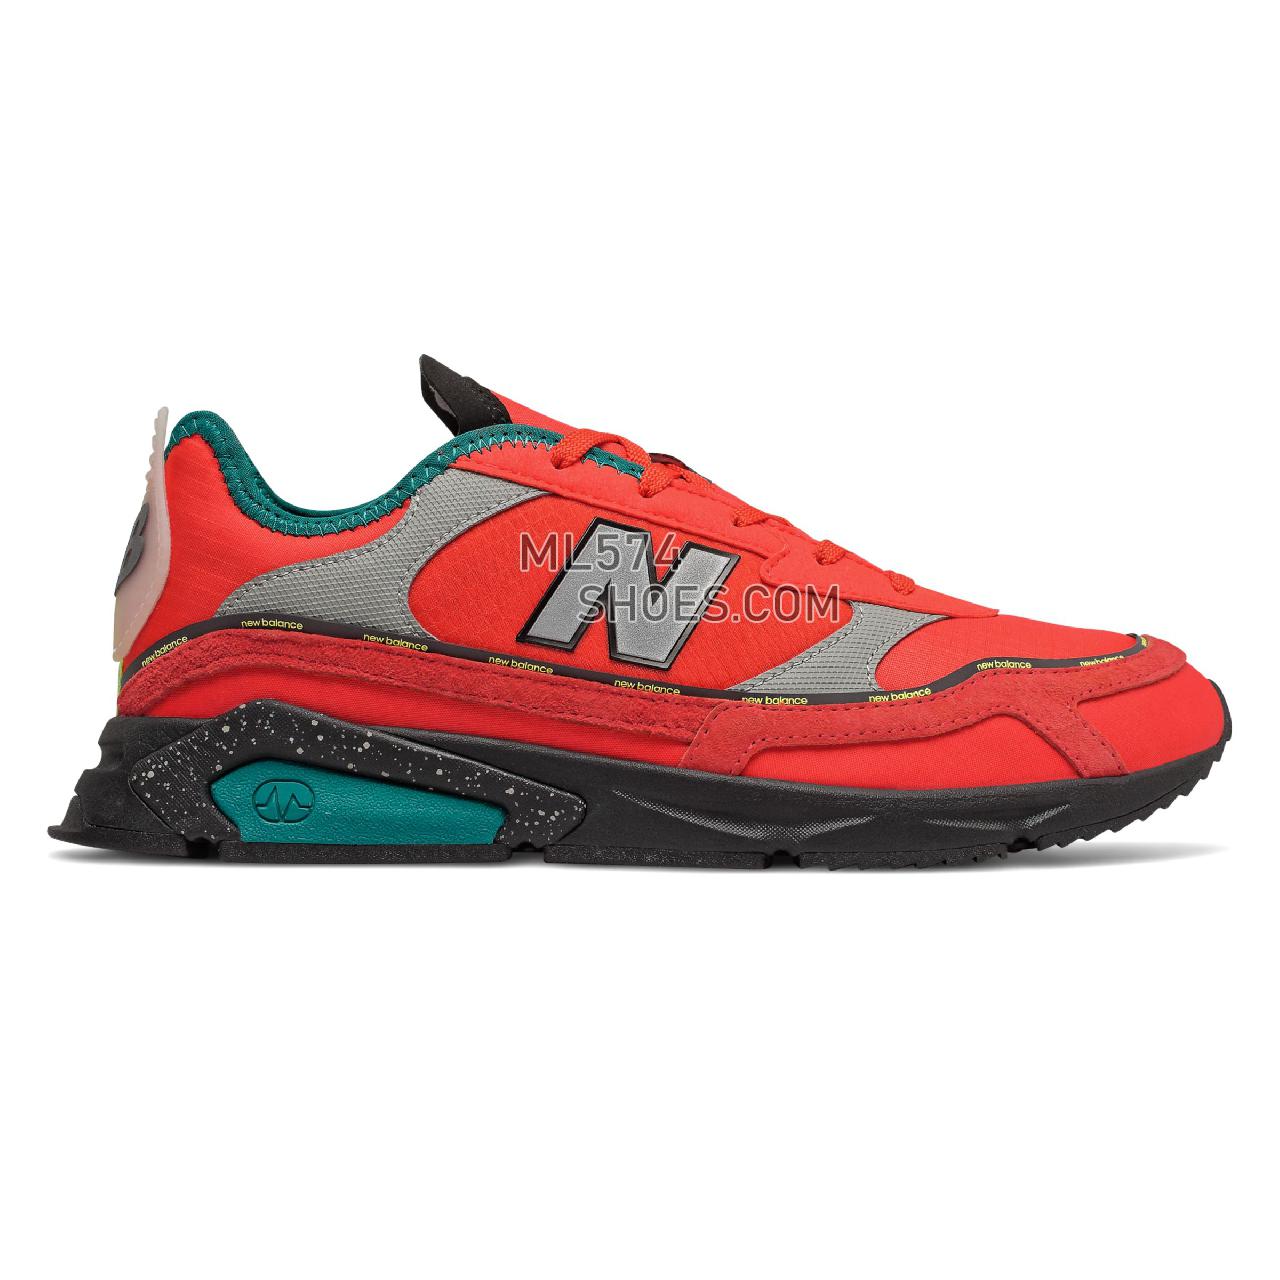 New Balance X-Racer - Men's Sport Style Sneakers - Neo Flame with Team Teal and Black - MSXRCHSB